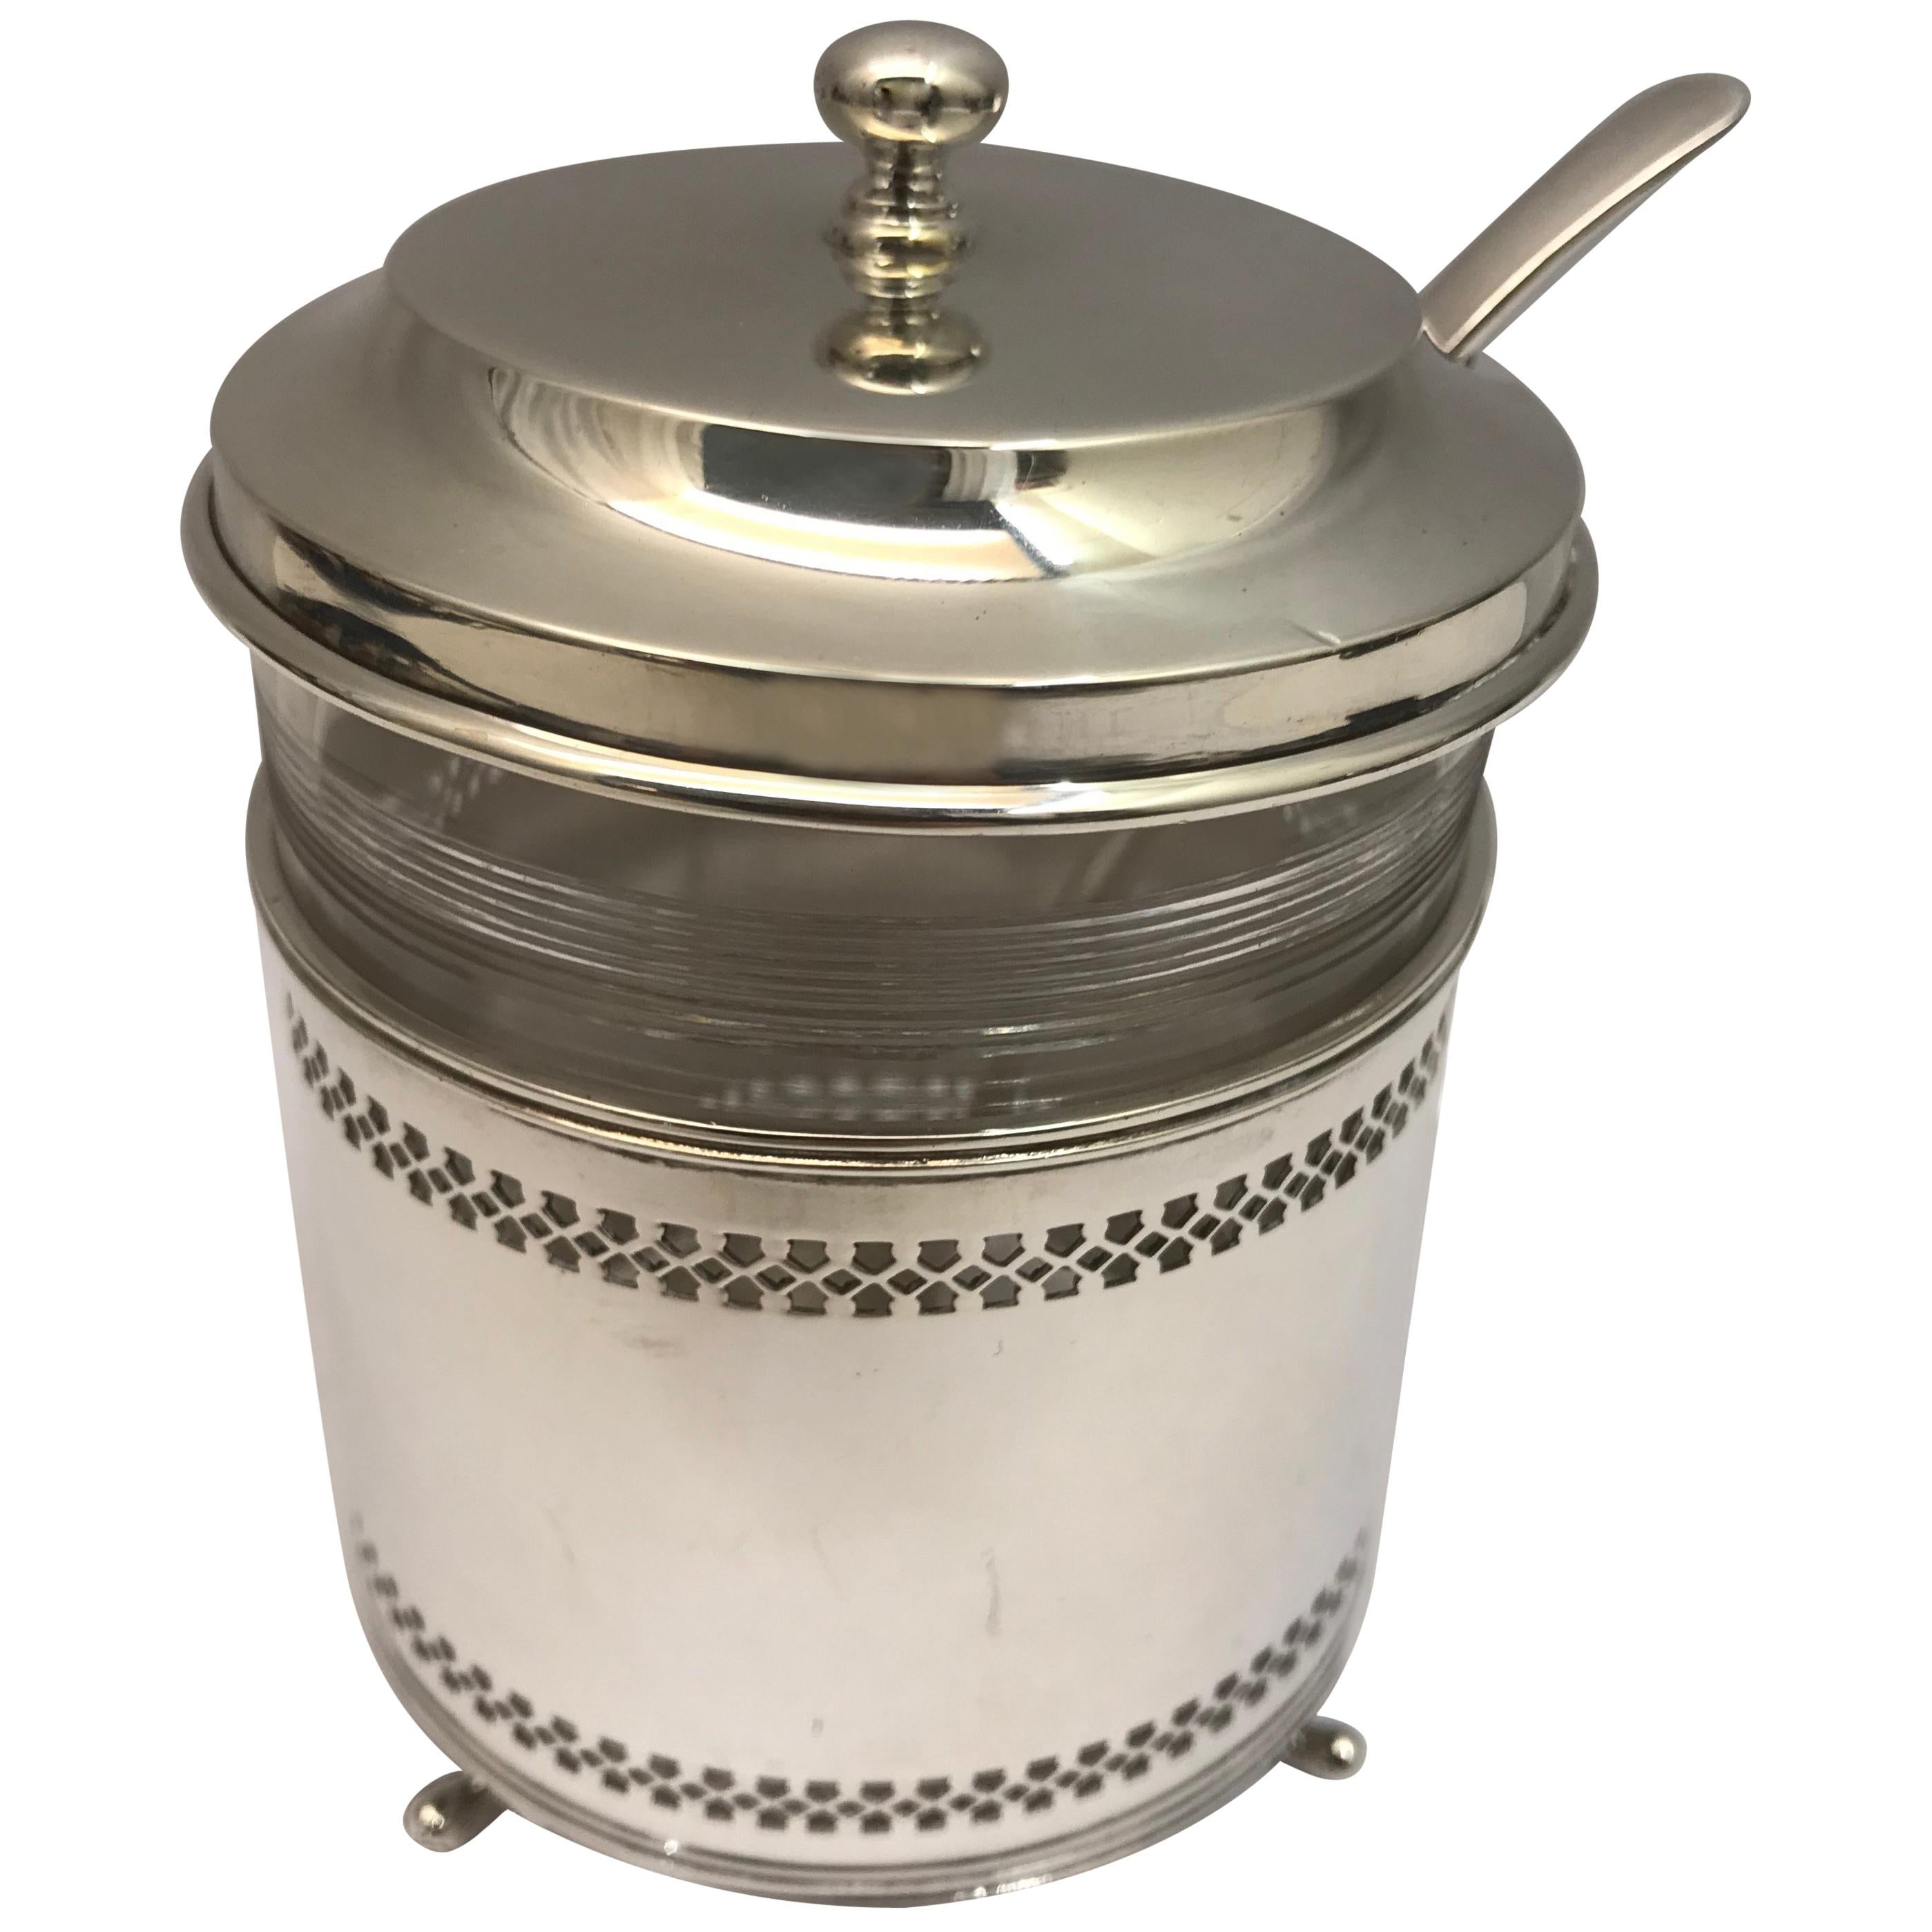 Antique Silver Pot with Spoon and Cover For Sale